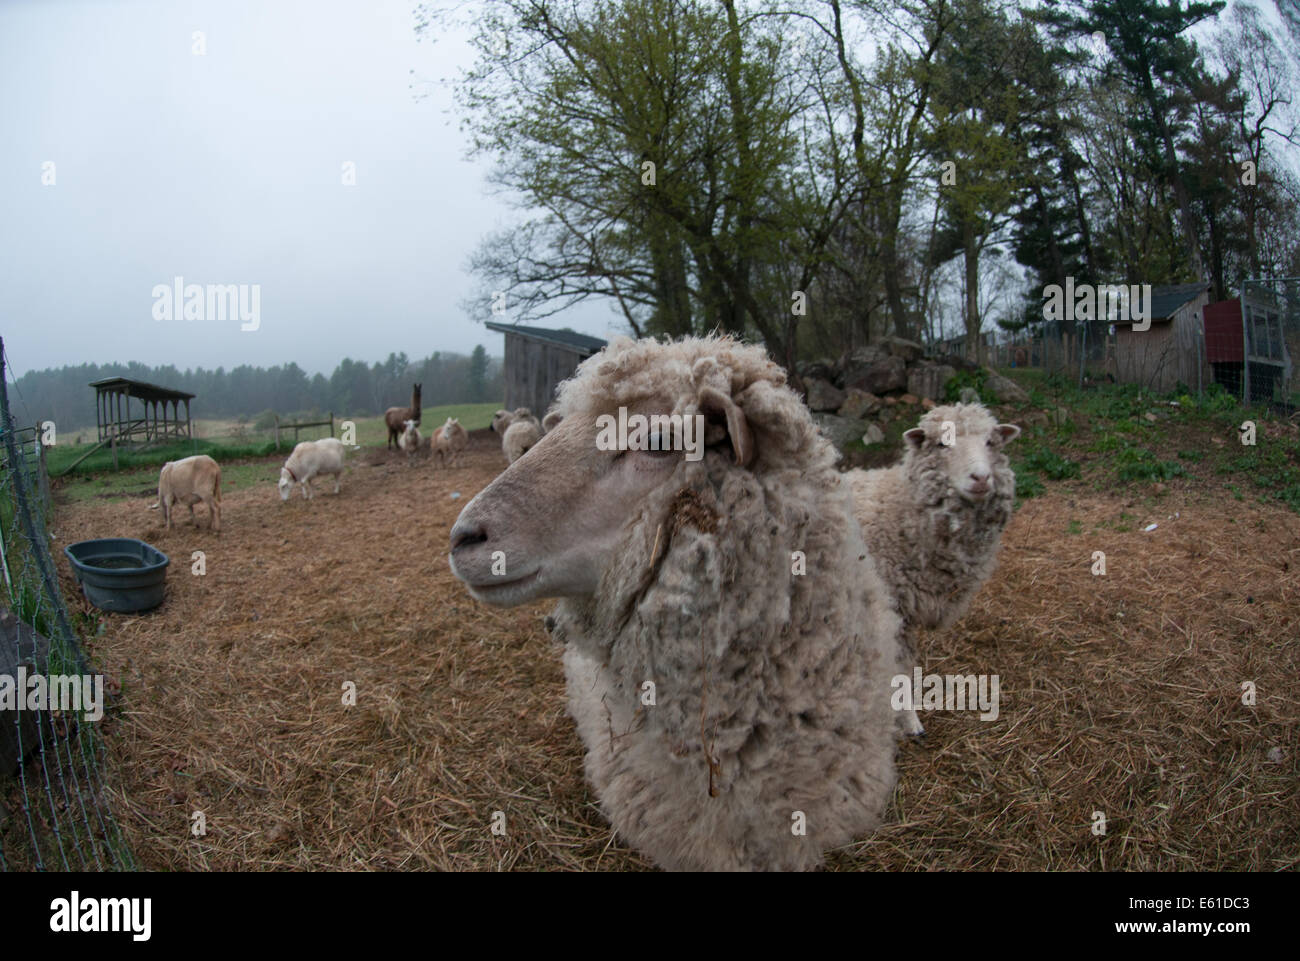 Sheep on a New England farm on a cloudy day. Shot with a fisheye lens. Stock Photo